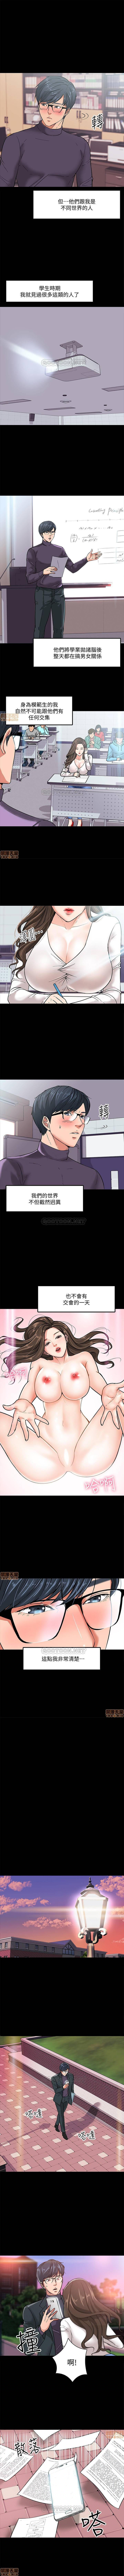 Ride PROFESSOR, ARE YOU JUST GOING TO LOOK AT ME? | DESIRE SWAMP | 教授，你還等什麼? Ch. 2 [Chinese] Manhwa Stockings - Page 6